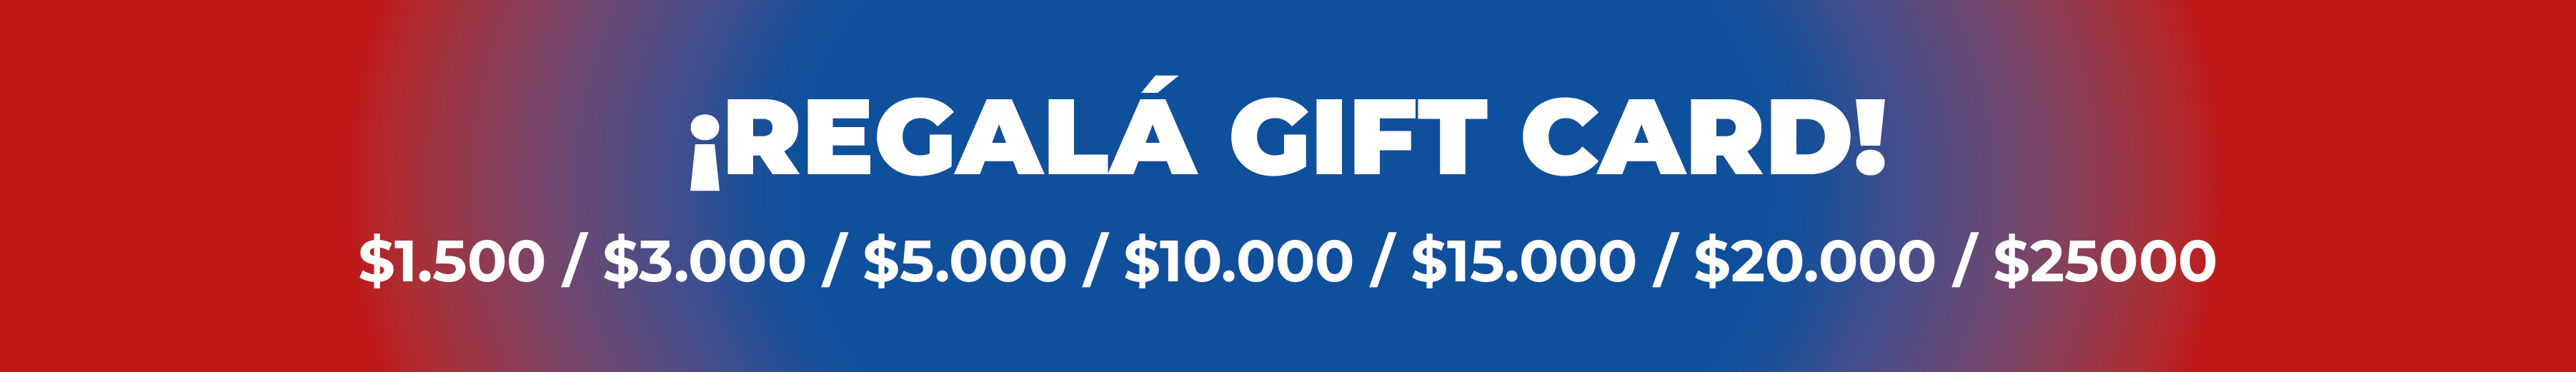 REGALA GIFT CARDS